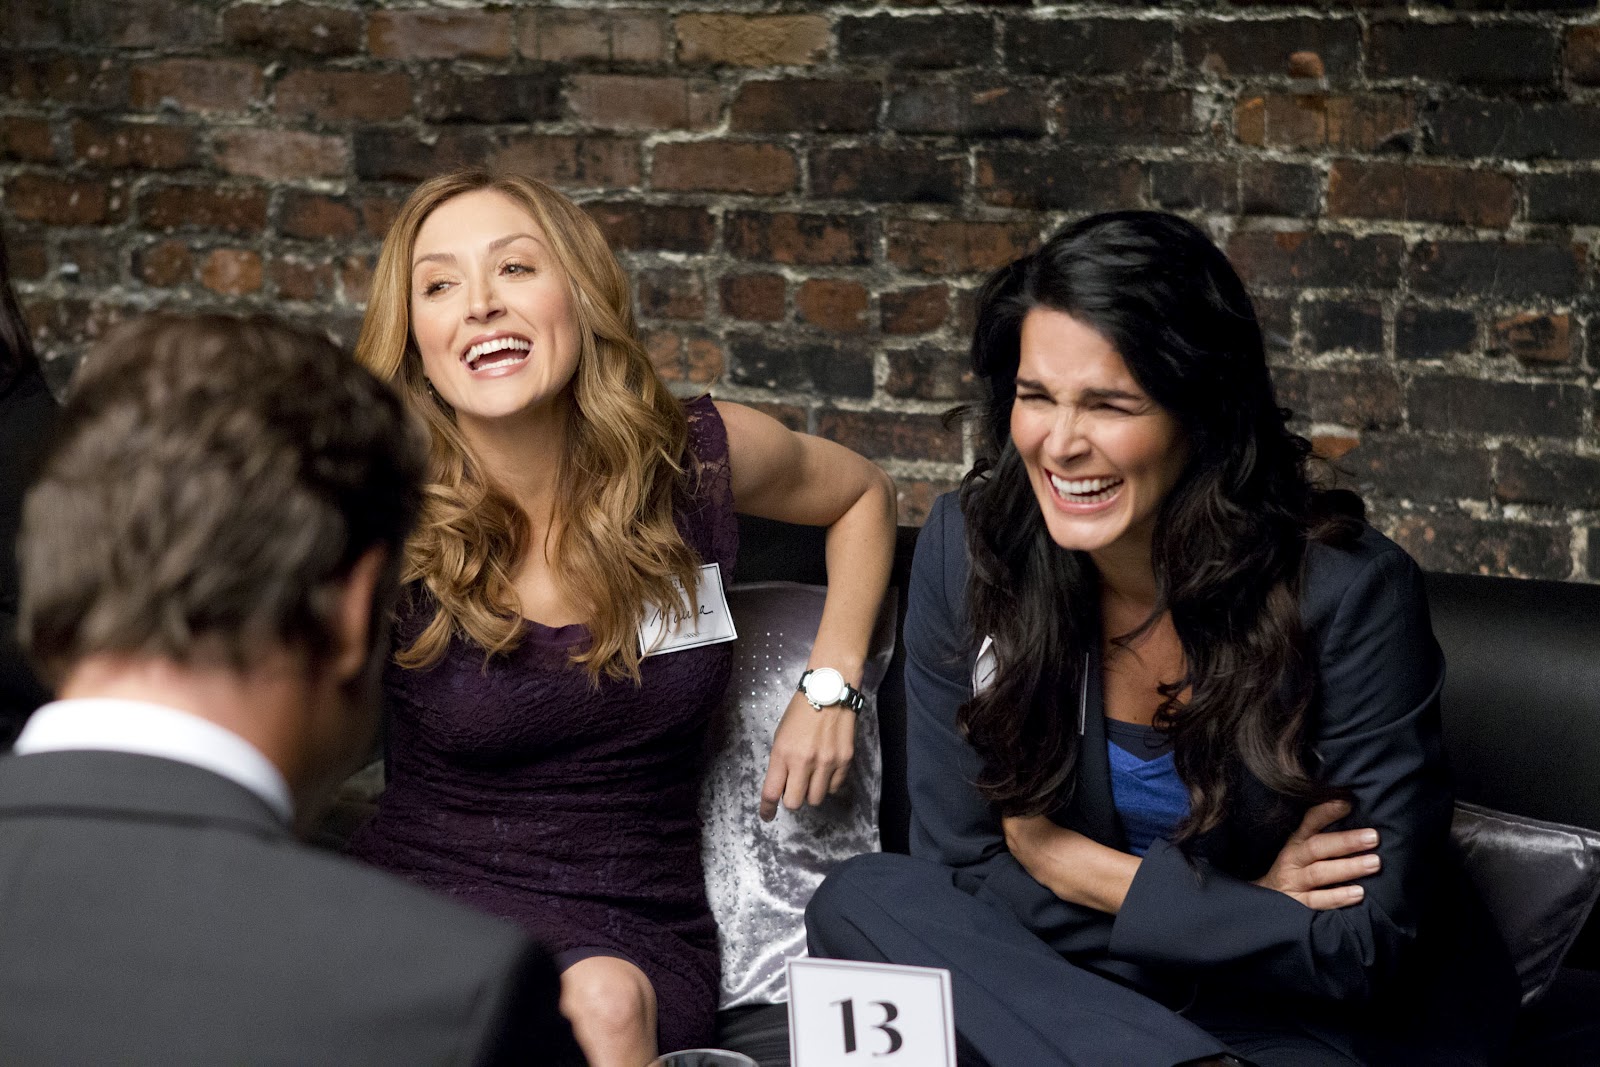 Rizzoli & Isles Photo Gallery: Speed dating promo S3: New TNT Photos